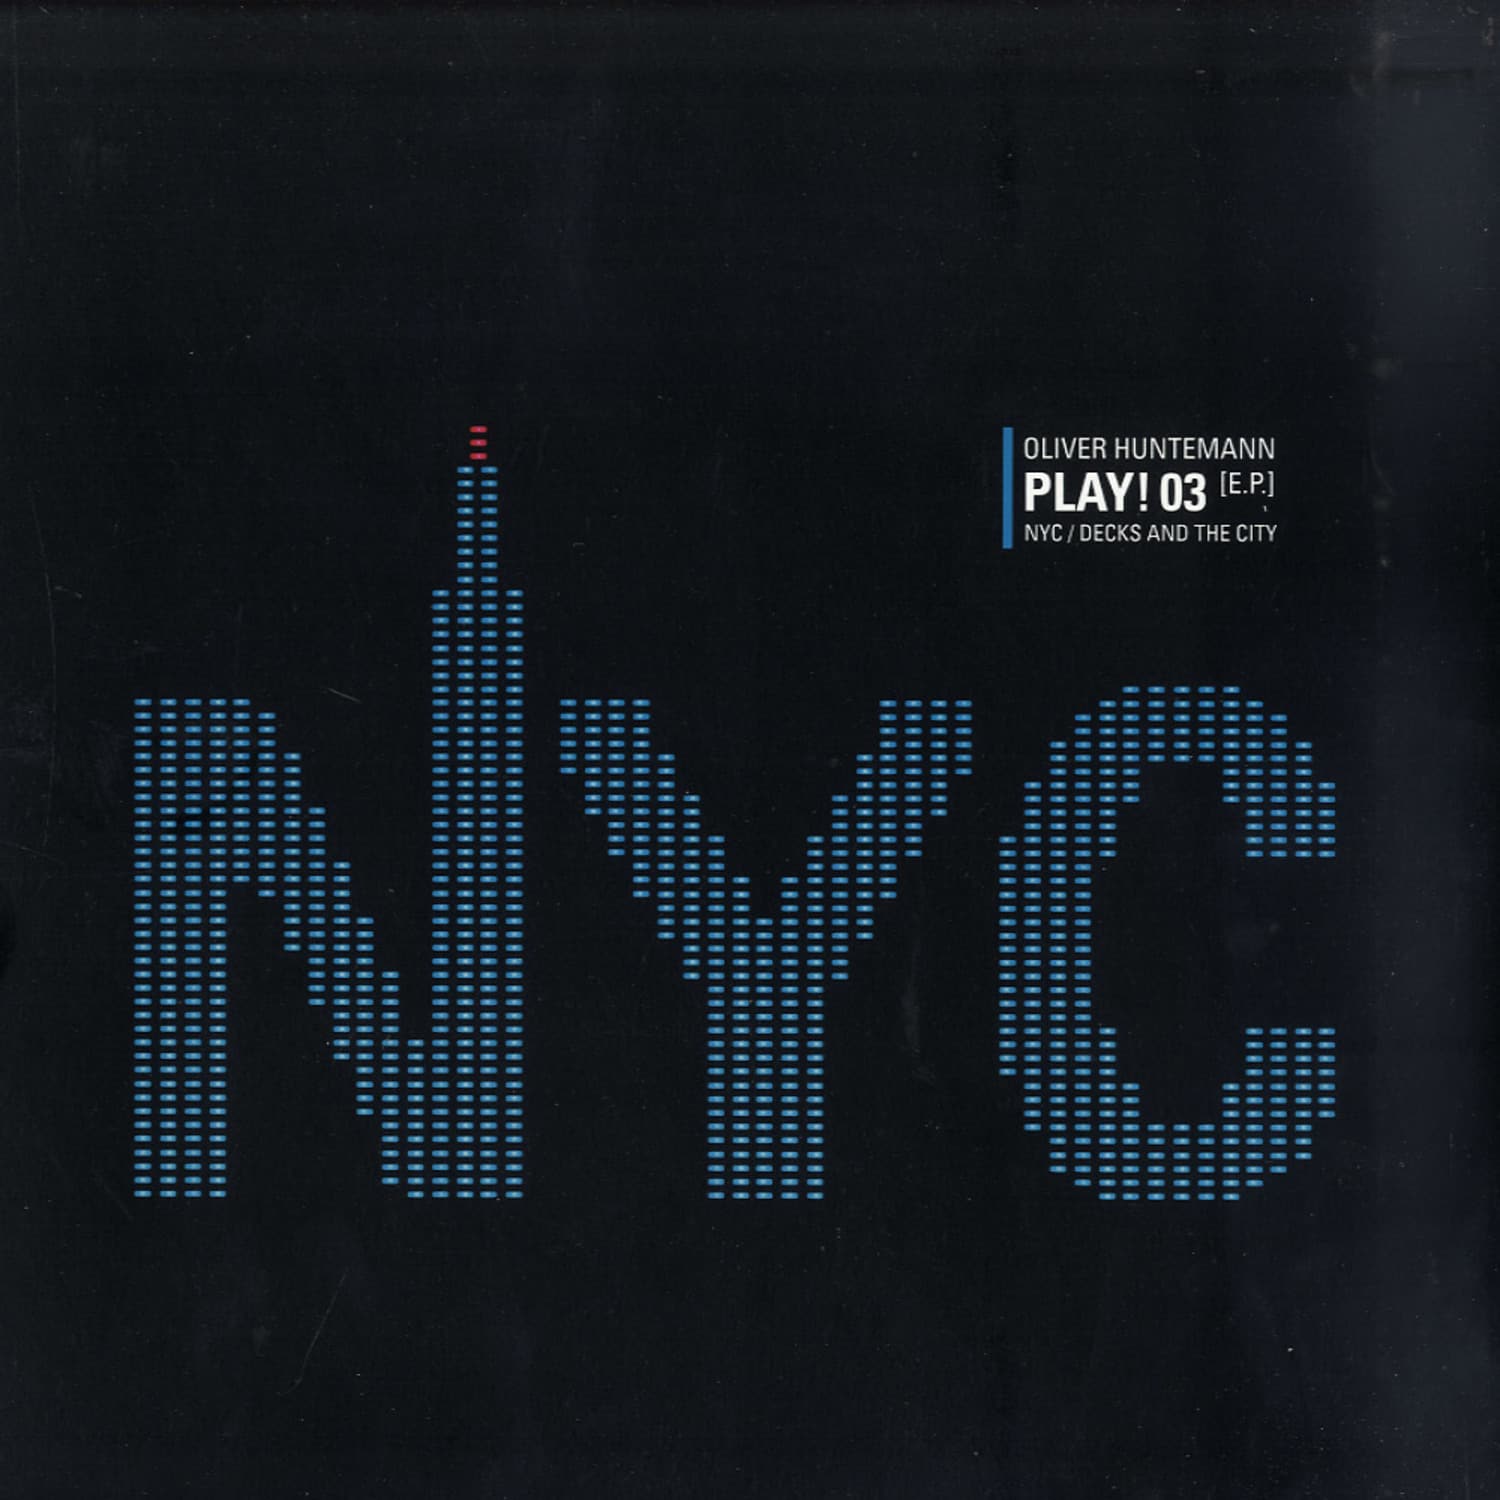 Oliver Huntemann - PLAY ! 03 EP - NYC / DECKS AND THE CITY